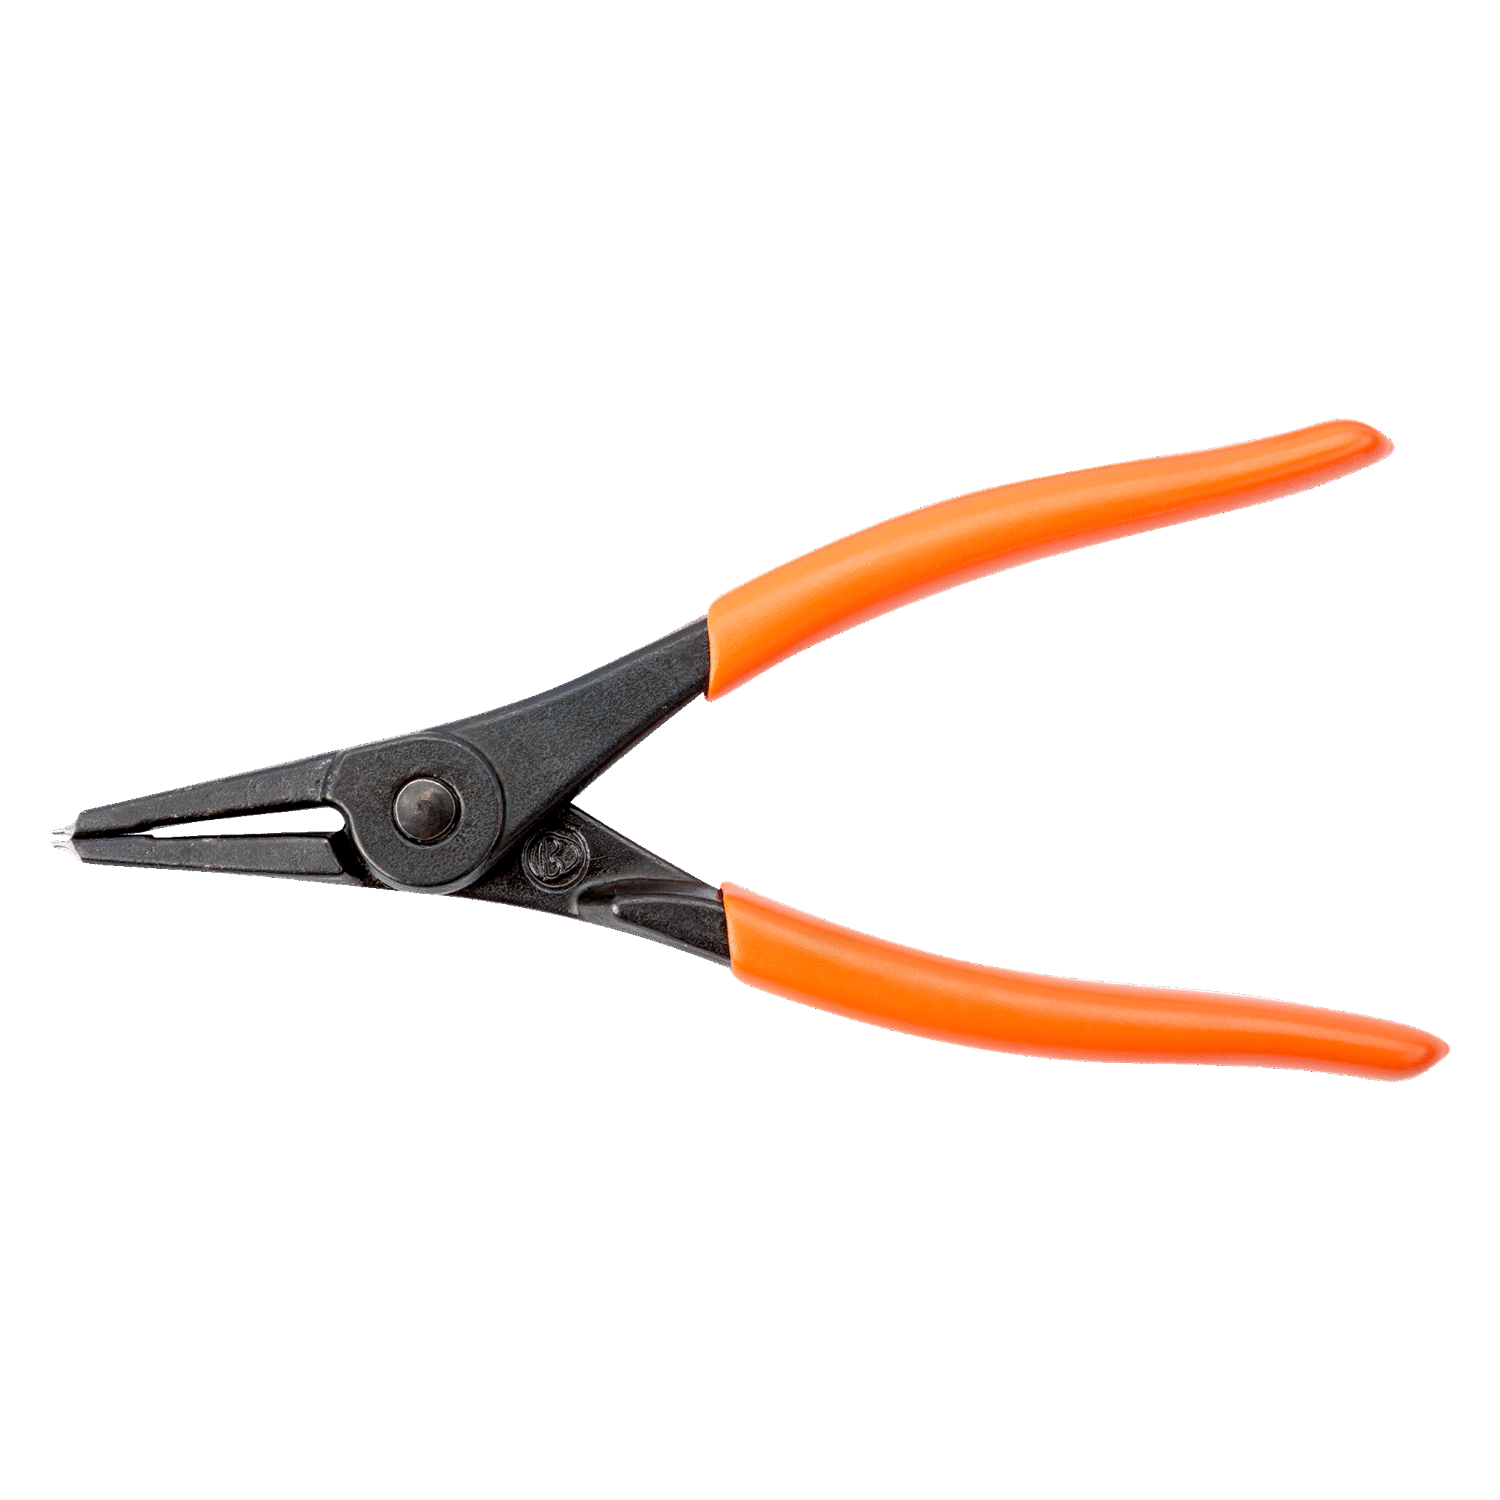 BAHCO 2900 External Circlip Plier with Straight Jaws - Premium Circlip Plier from BAHCO - Shop now at Yew Aik.